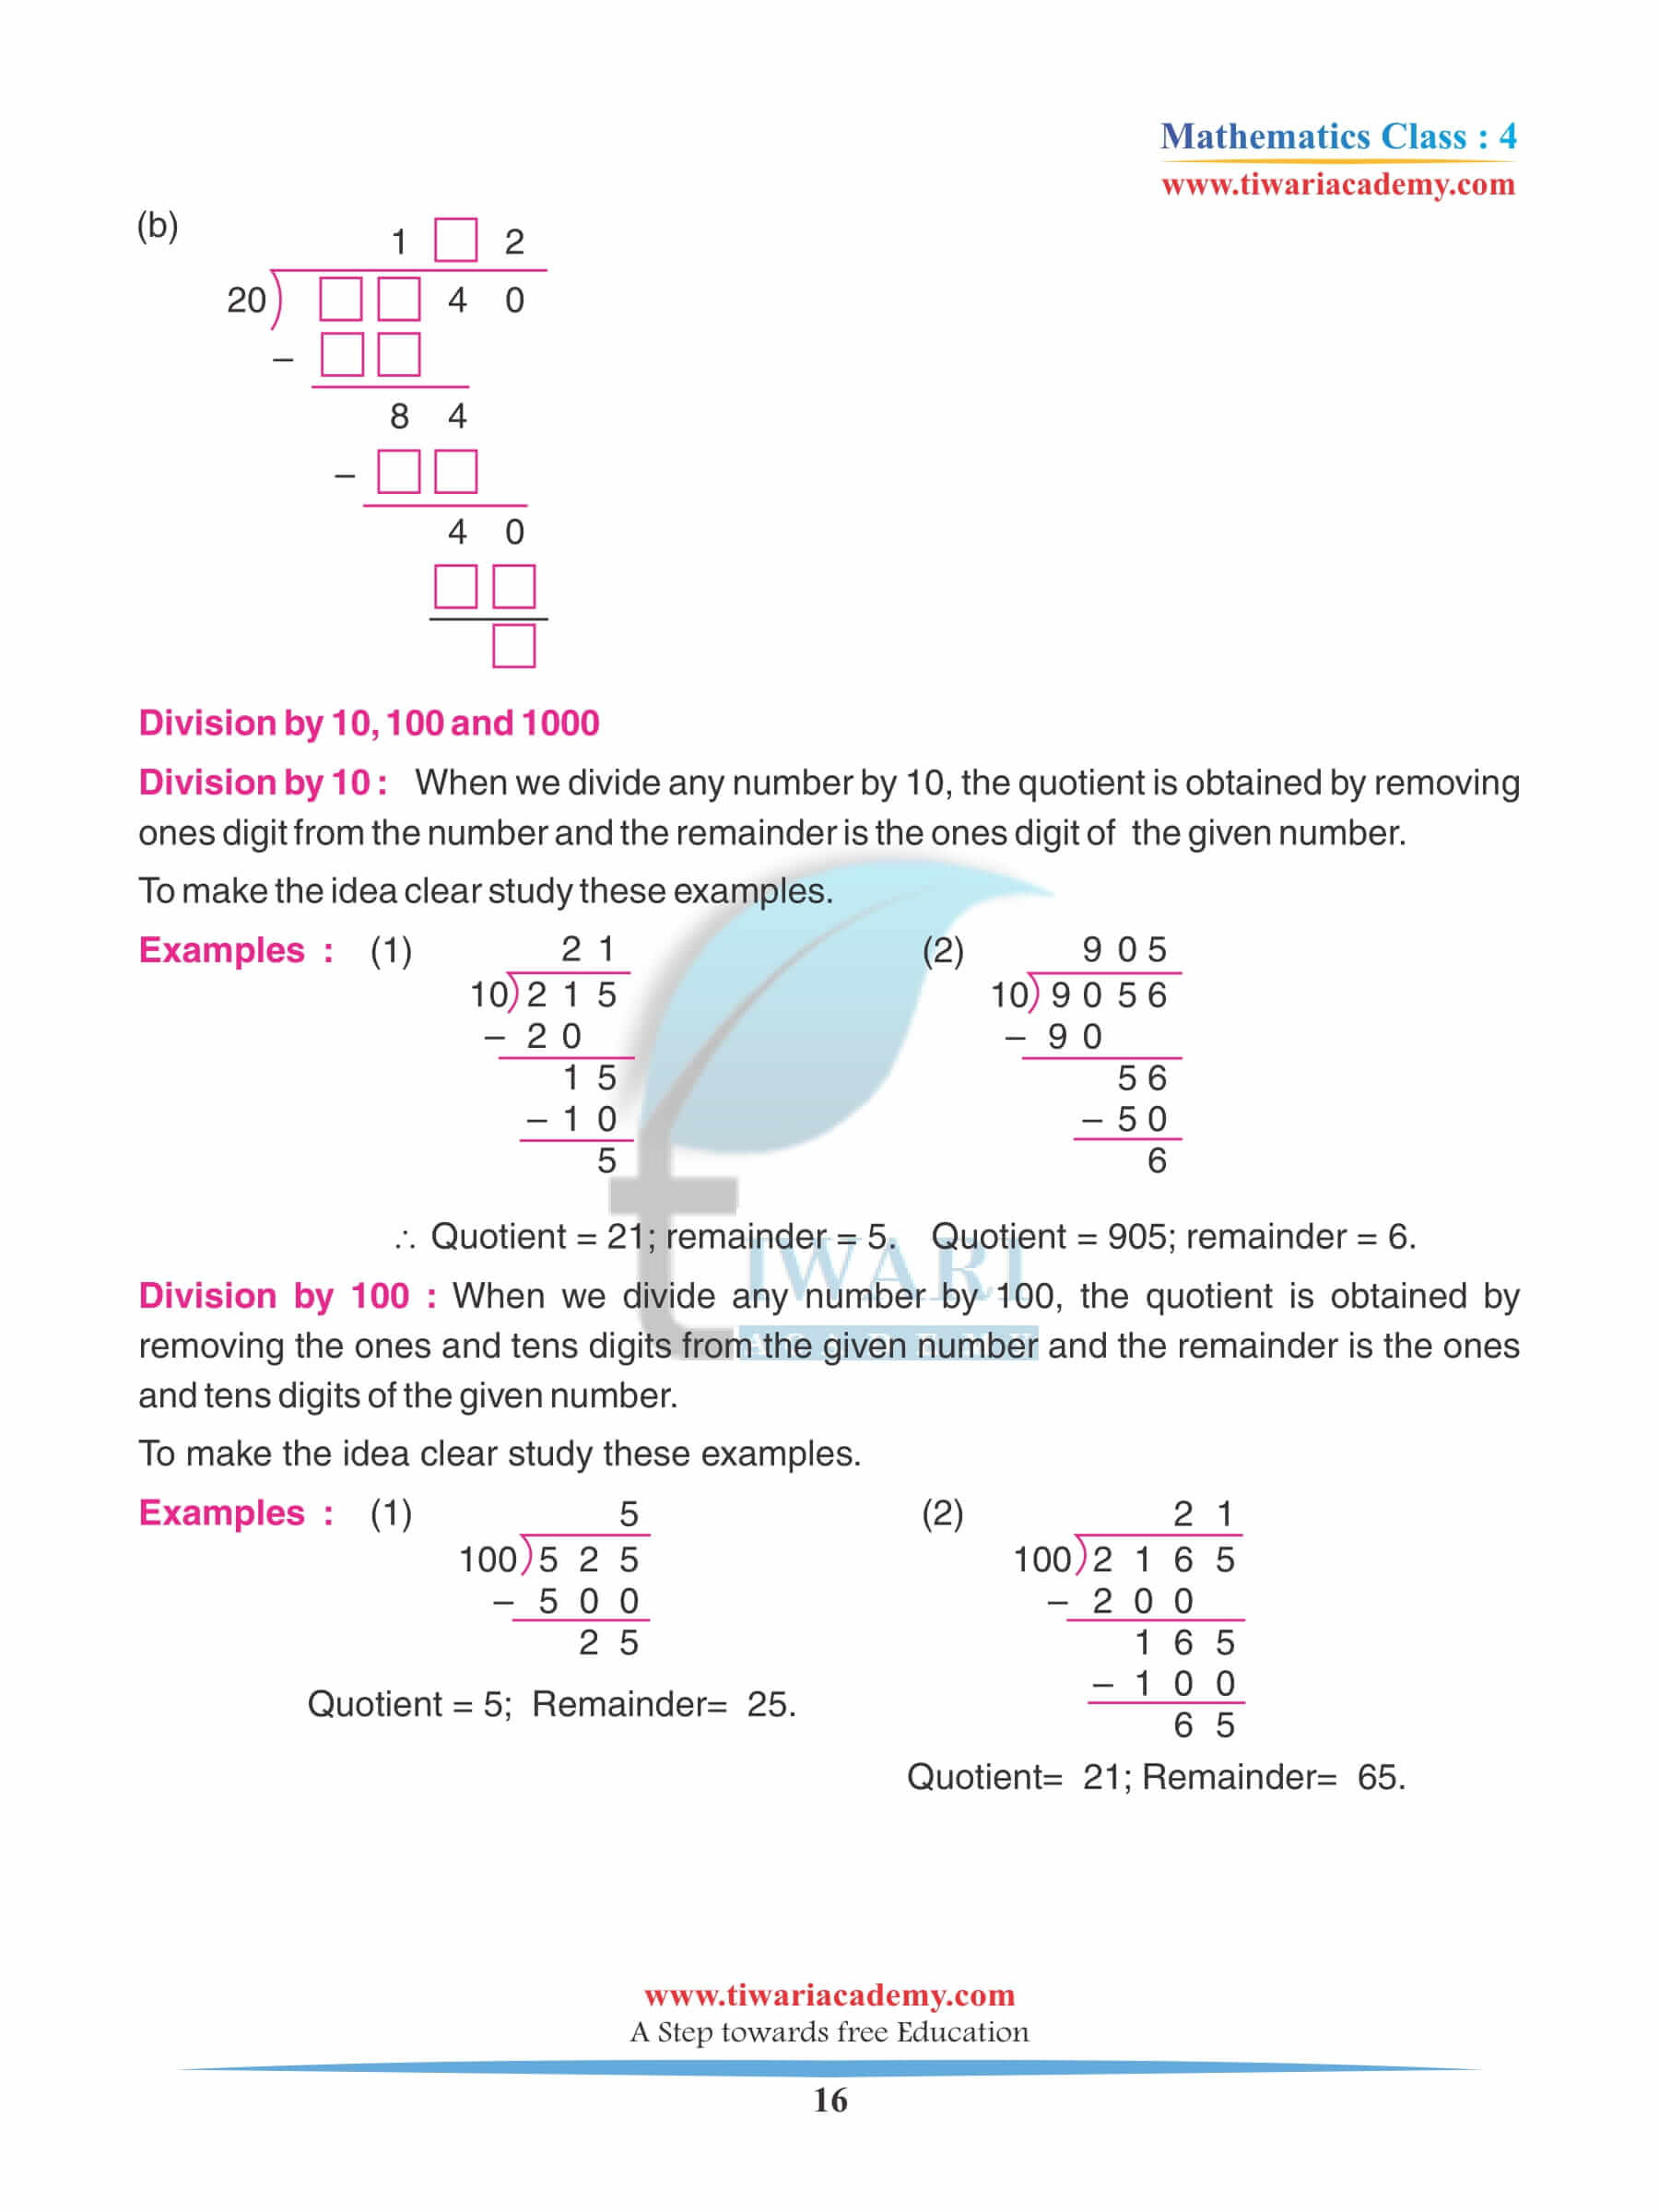 Class 4 Maths Chapter 11 Extra practice questions